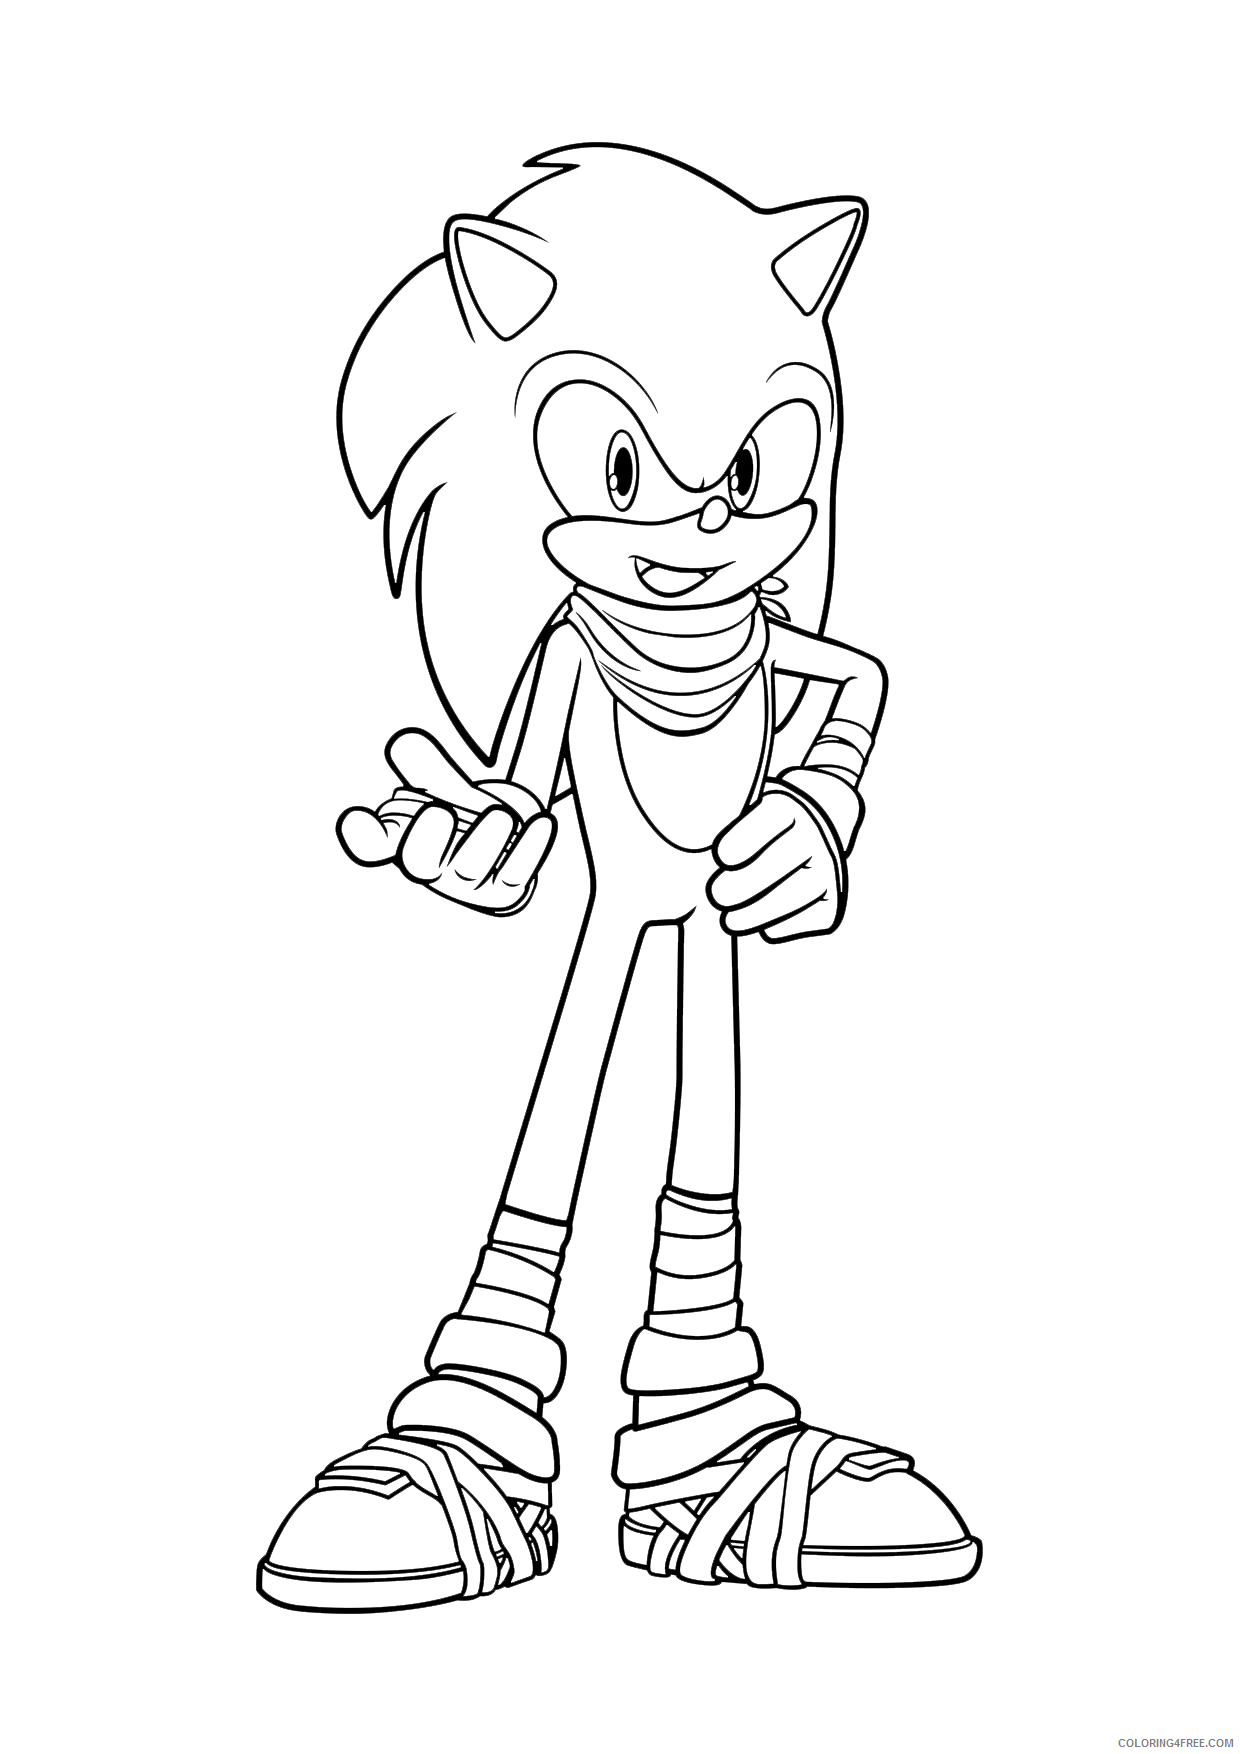 Fantastic Sonic Boom Sonic Coloring Pages Unlock more insights!